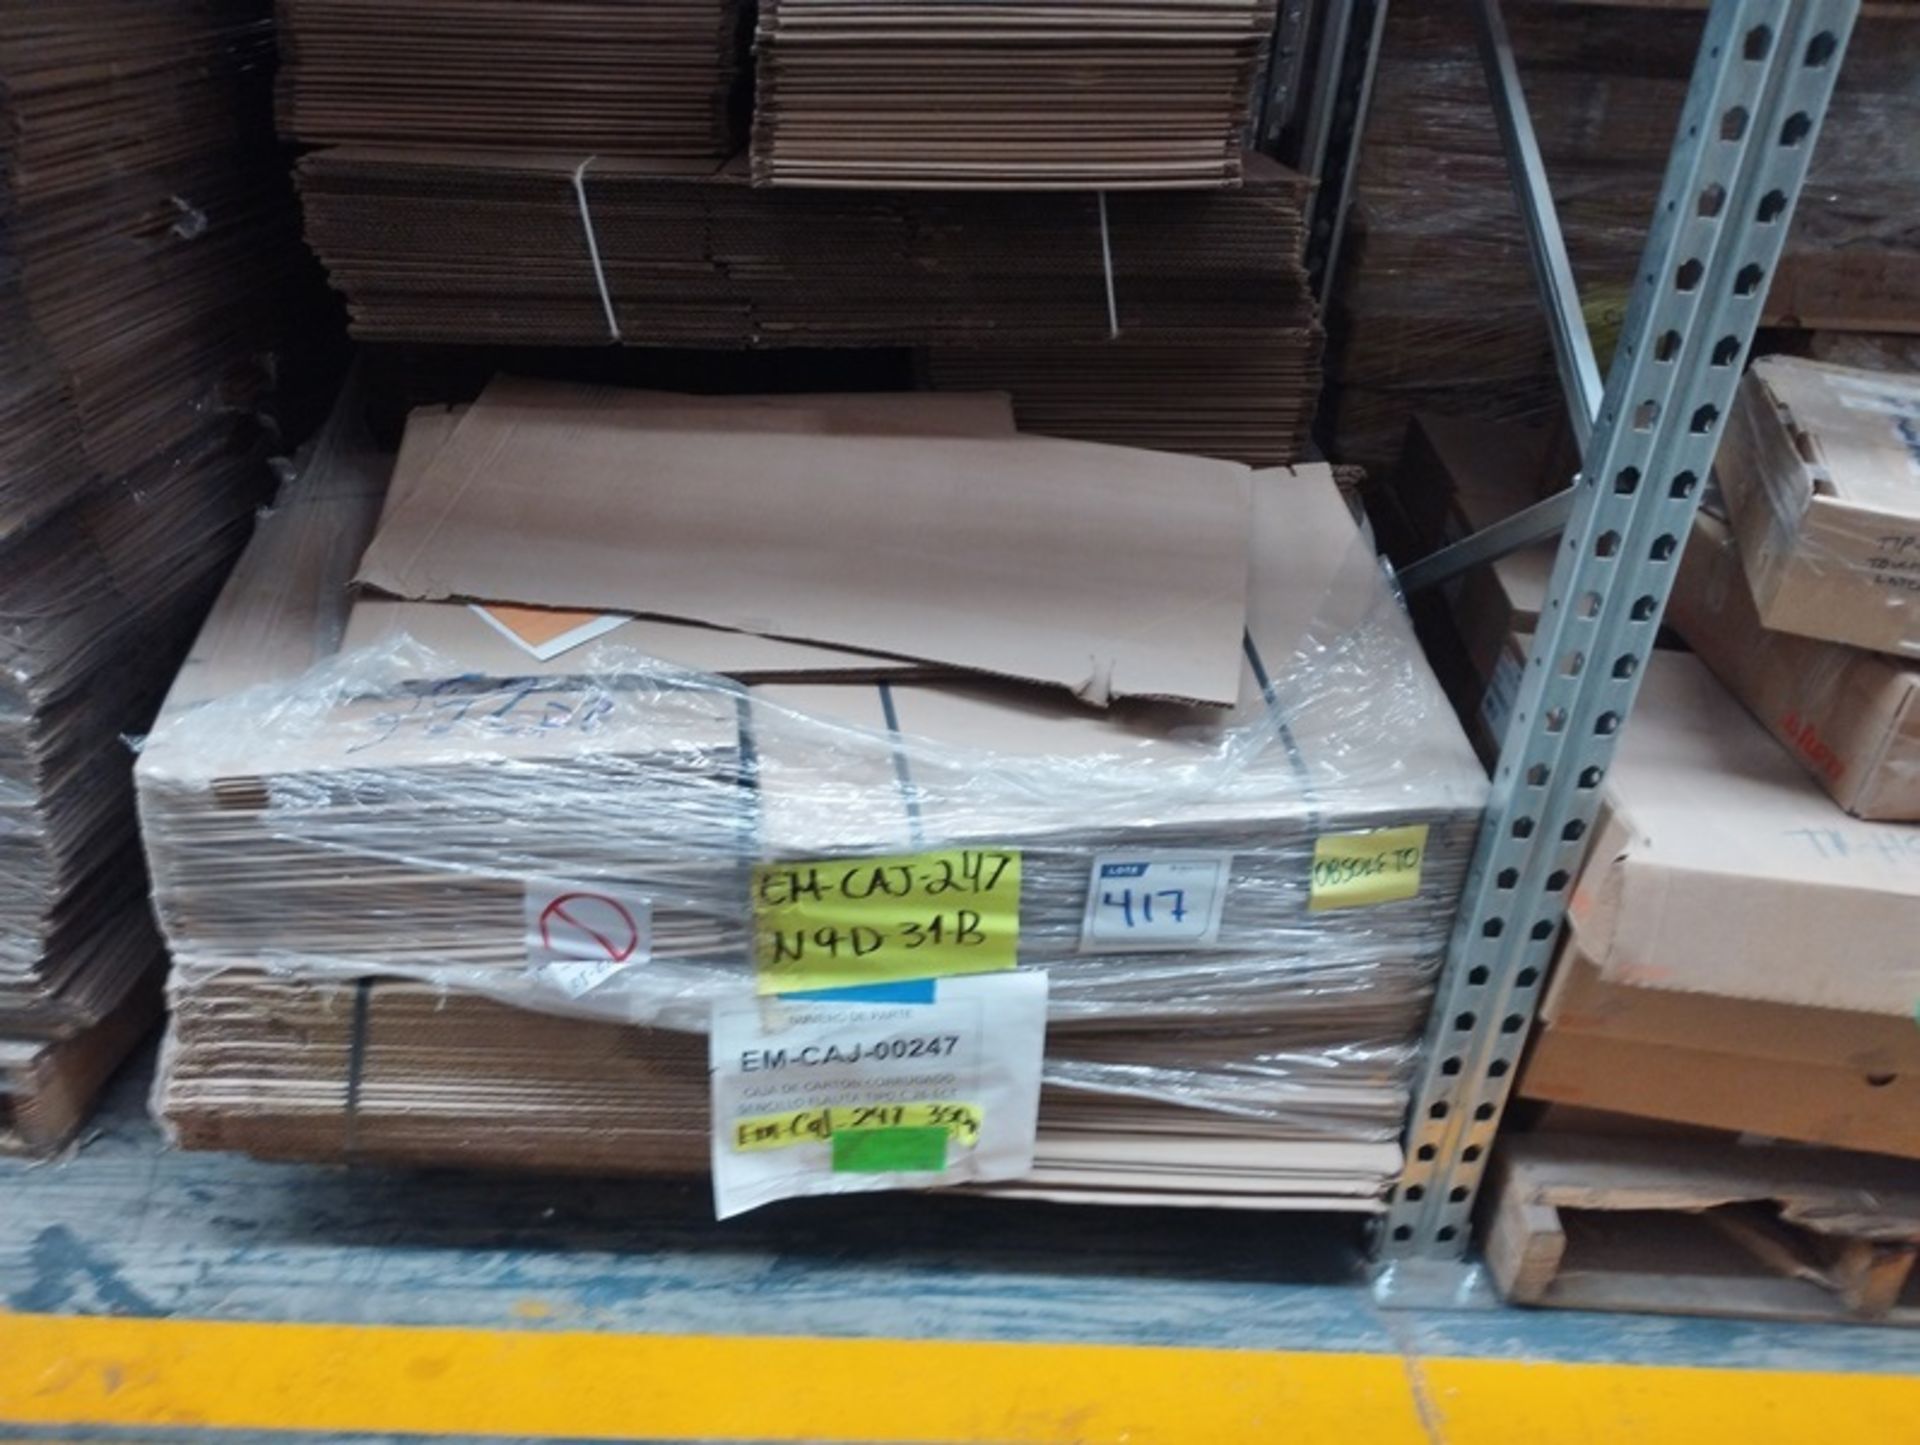 LOT OF APPROXIMATELY (83,310) PCS OF CARDBOARD BOXES AND ACCESSORIES - Image 4 of 119